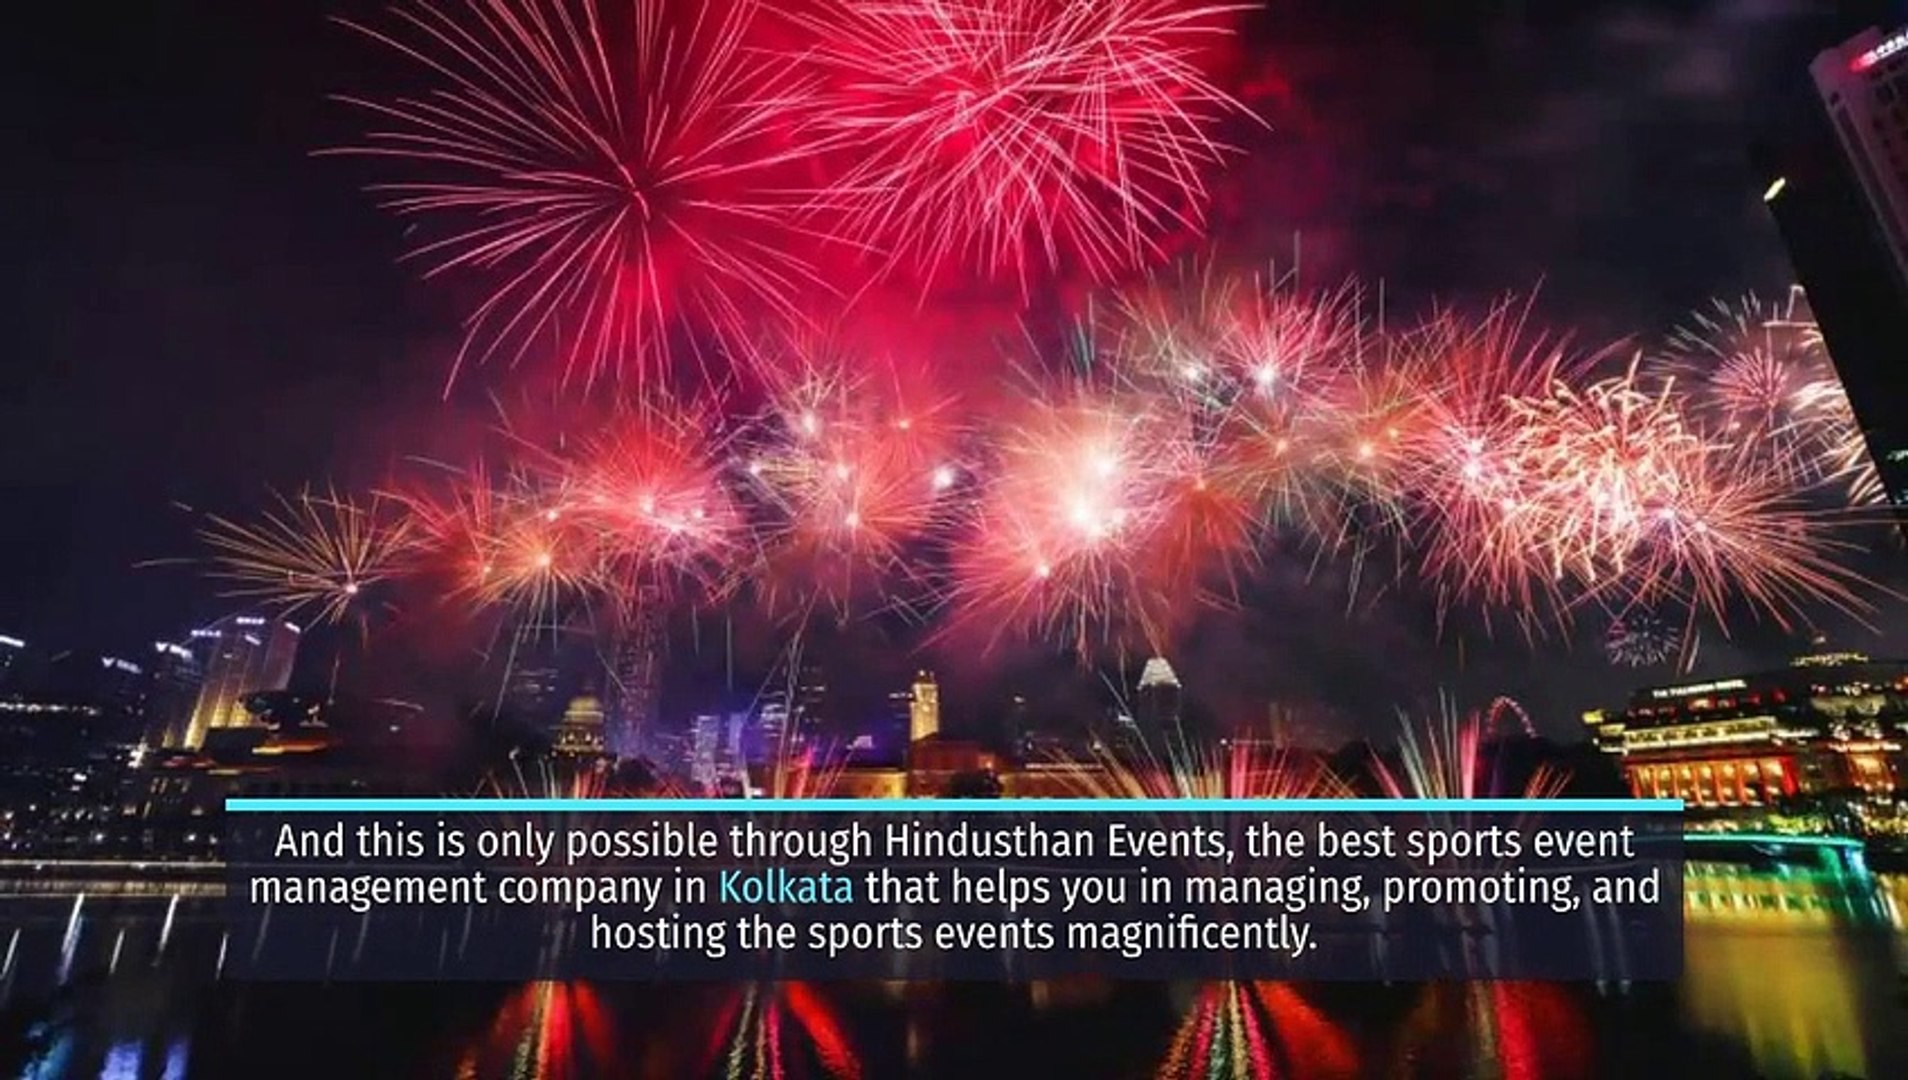 Top event companies in Kolkata | Want your sports event to be successful | Hindusthan Events